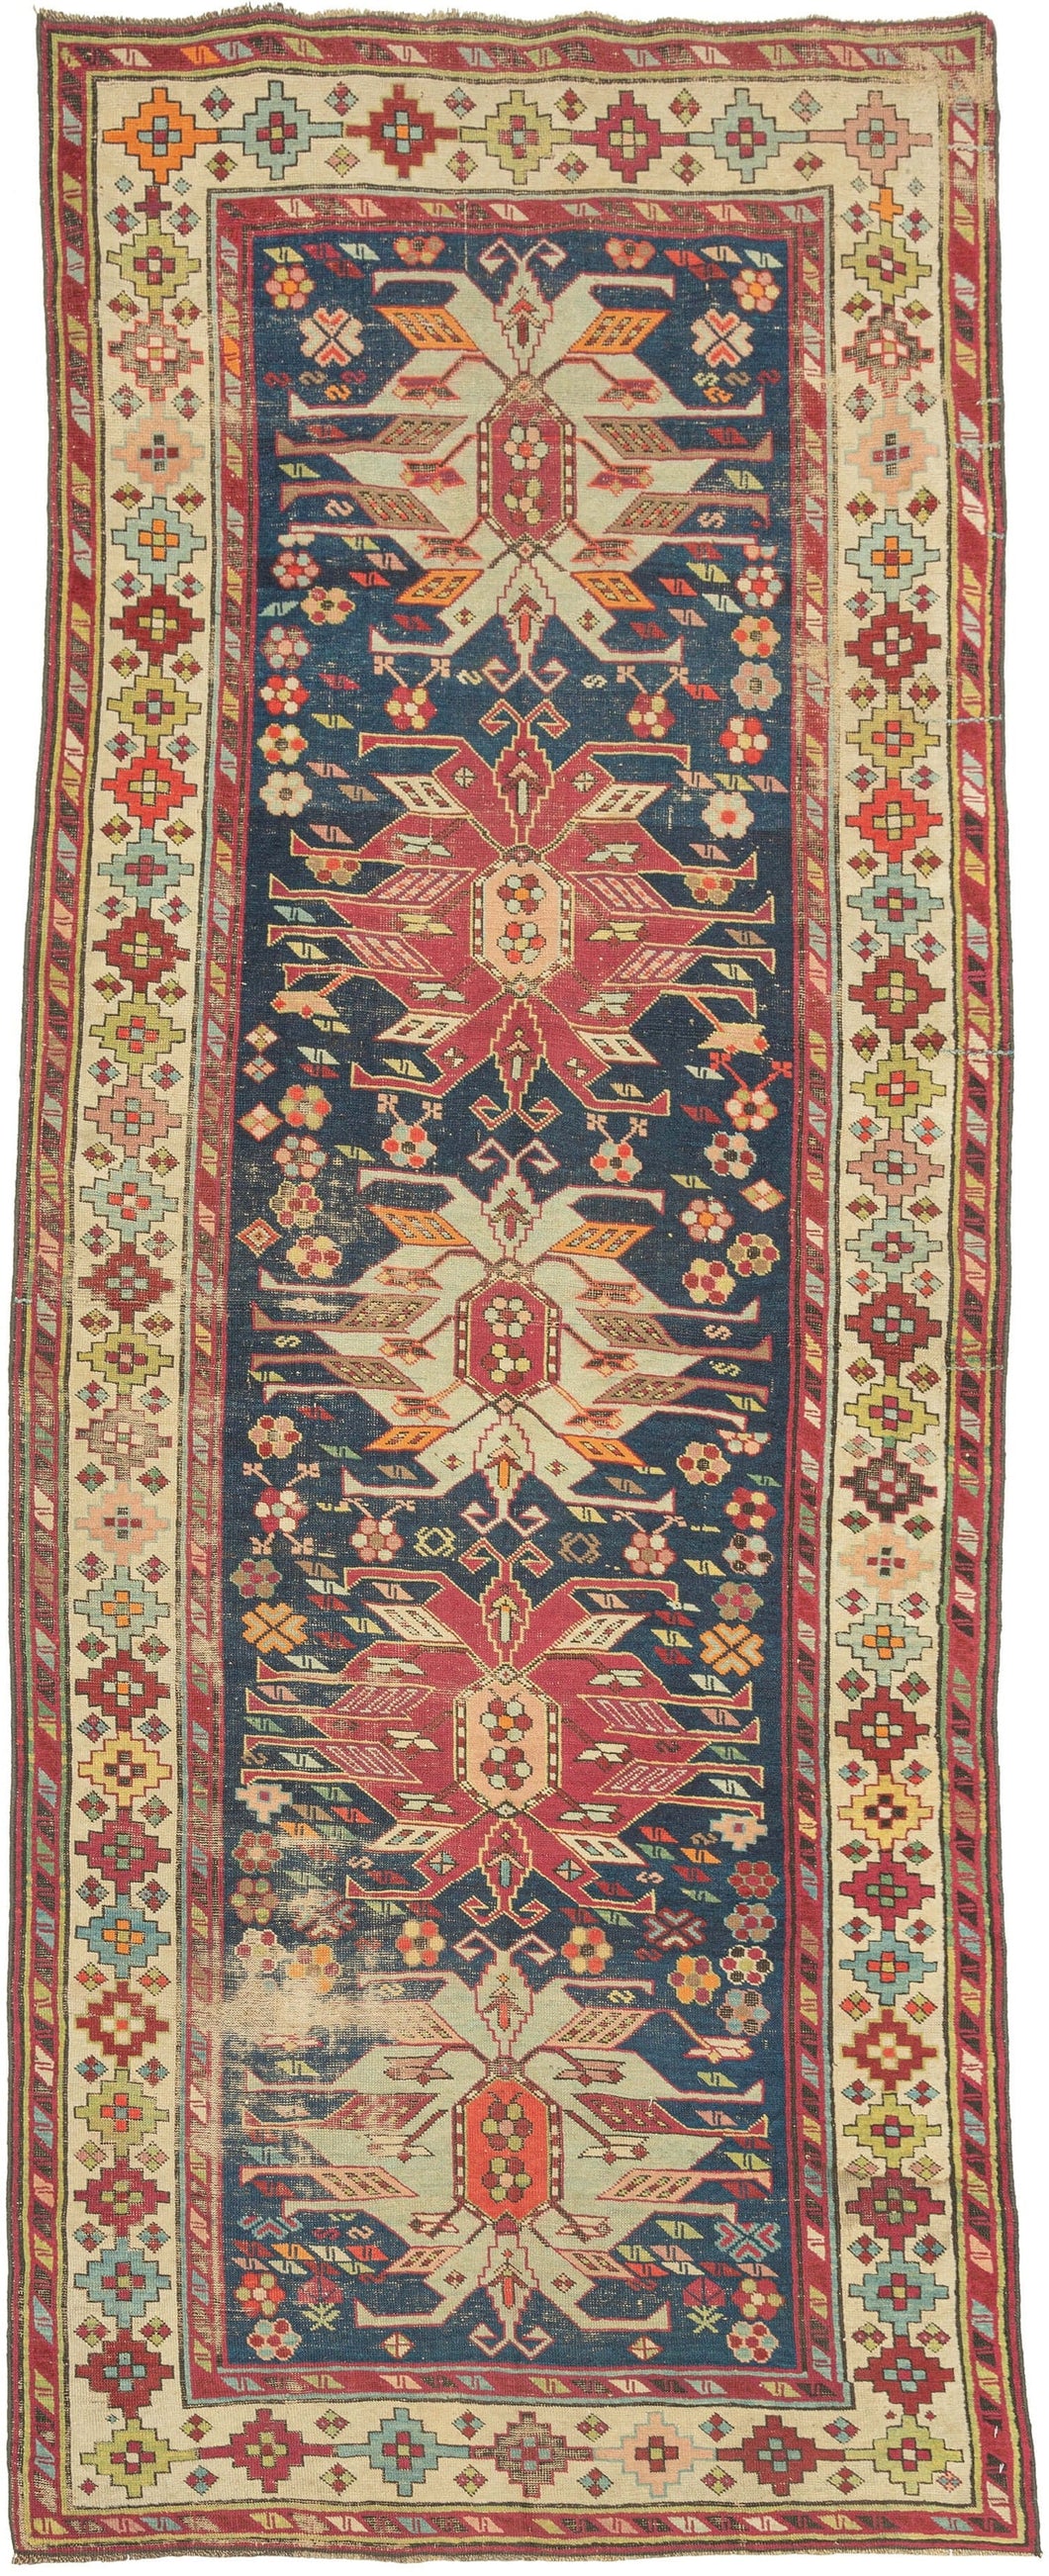 rug woven in the Karabagh region of the South Caucasus during the late 19th century. pattern of energetic palmettes that alternate between icey blue and magenta small rosettes scattered about like a field of colorful wildflowers. Karabagh weaving and achieved with cochineal, an insect derived dye. stepped polygon shaped rosettes in a wild array of tones including oranges, greens, pinks, blues, yellow and brown atop a bright ivory ground